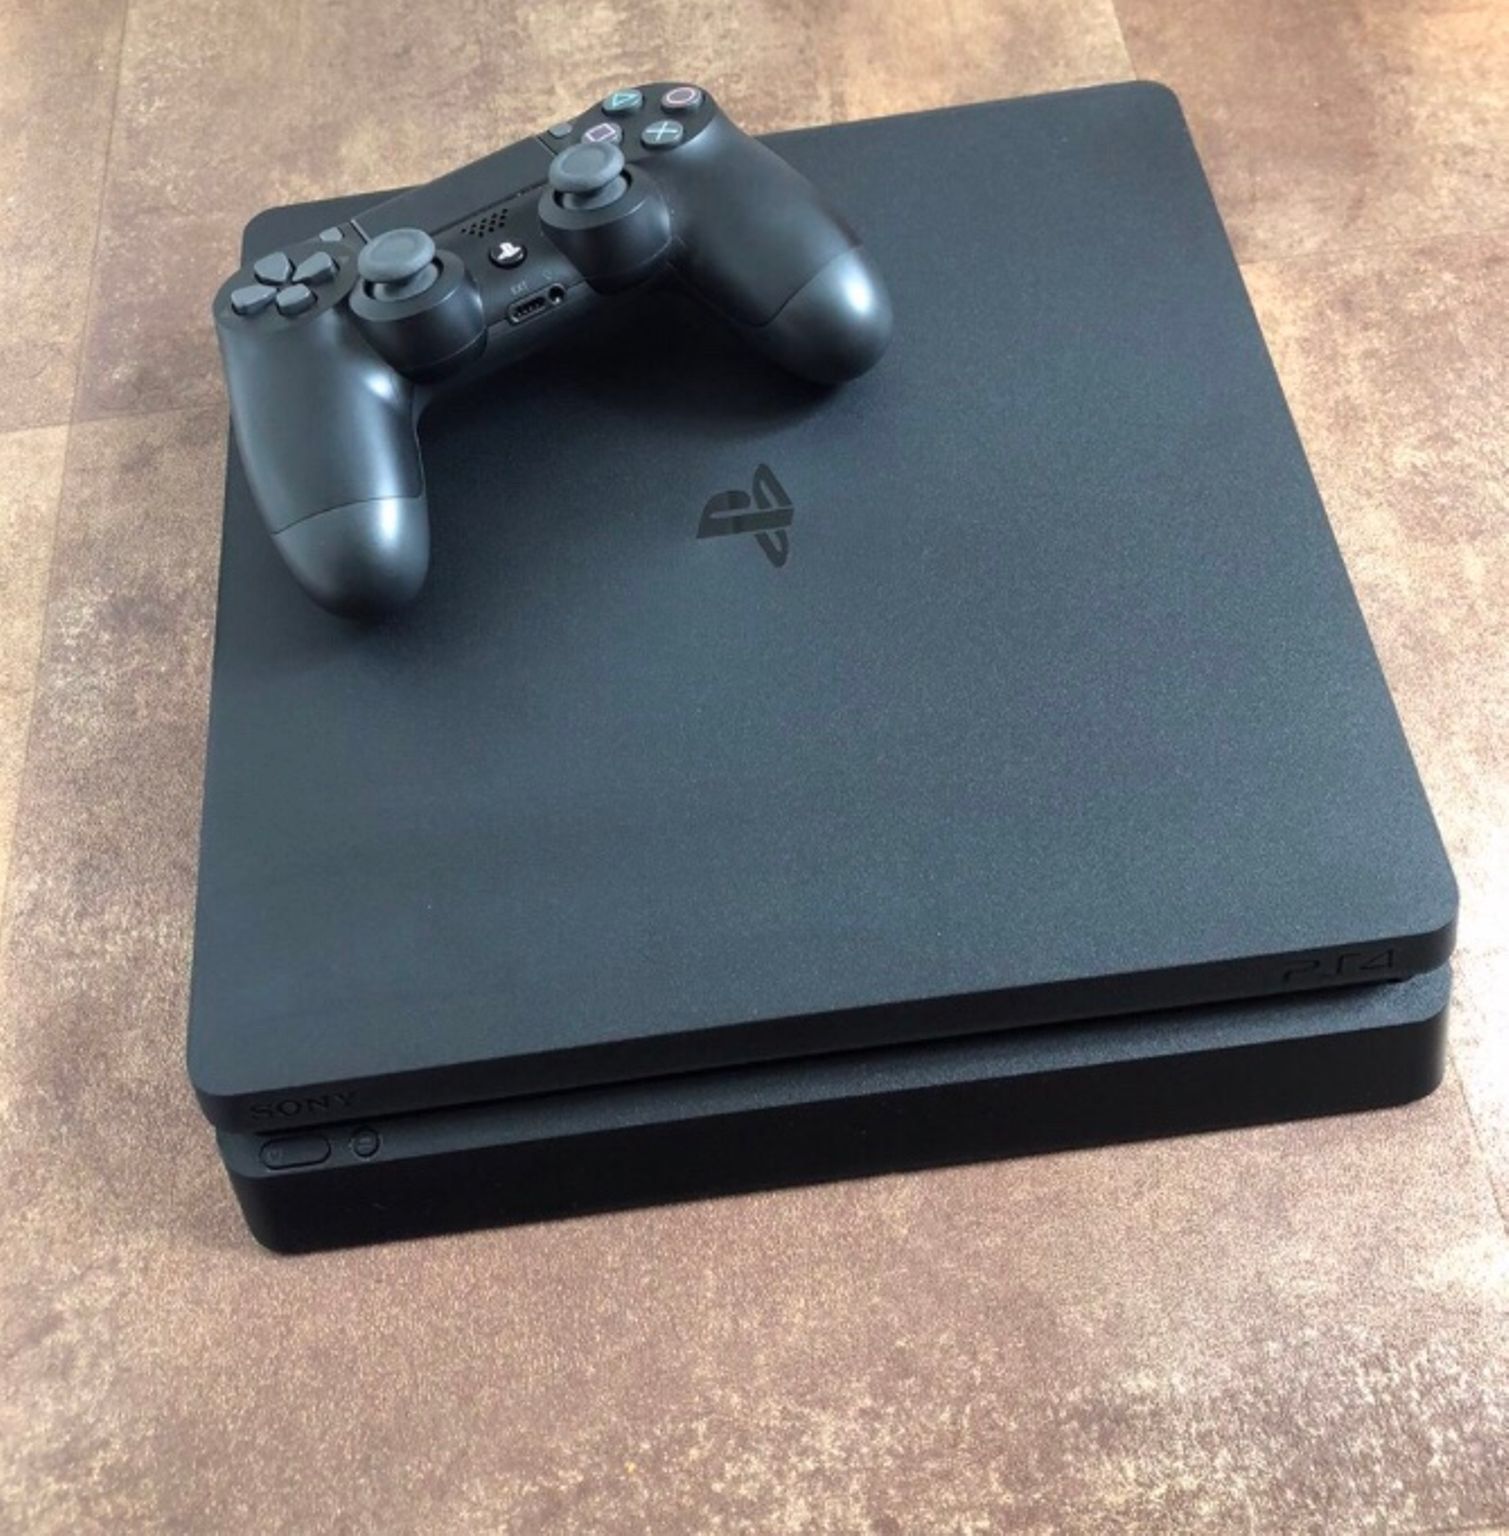 PS4 slim great condition